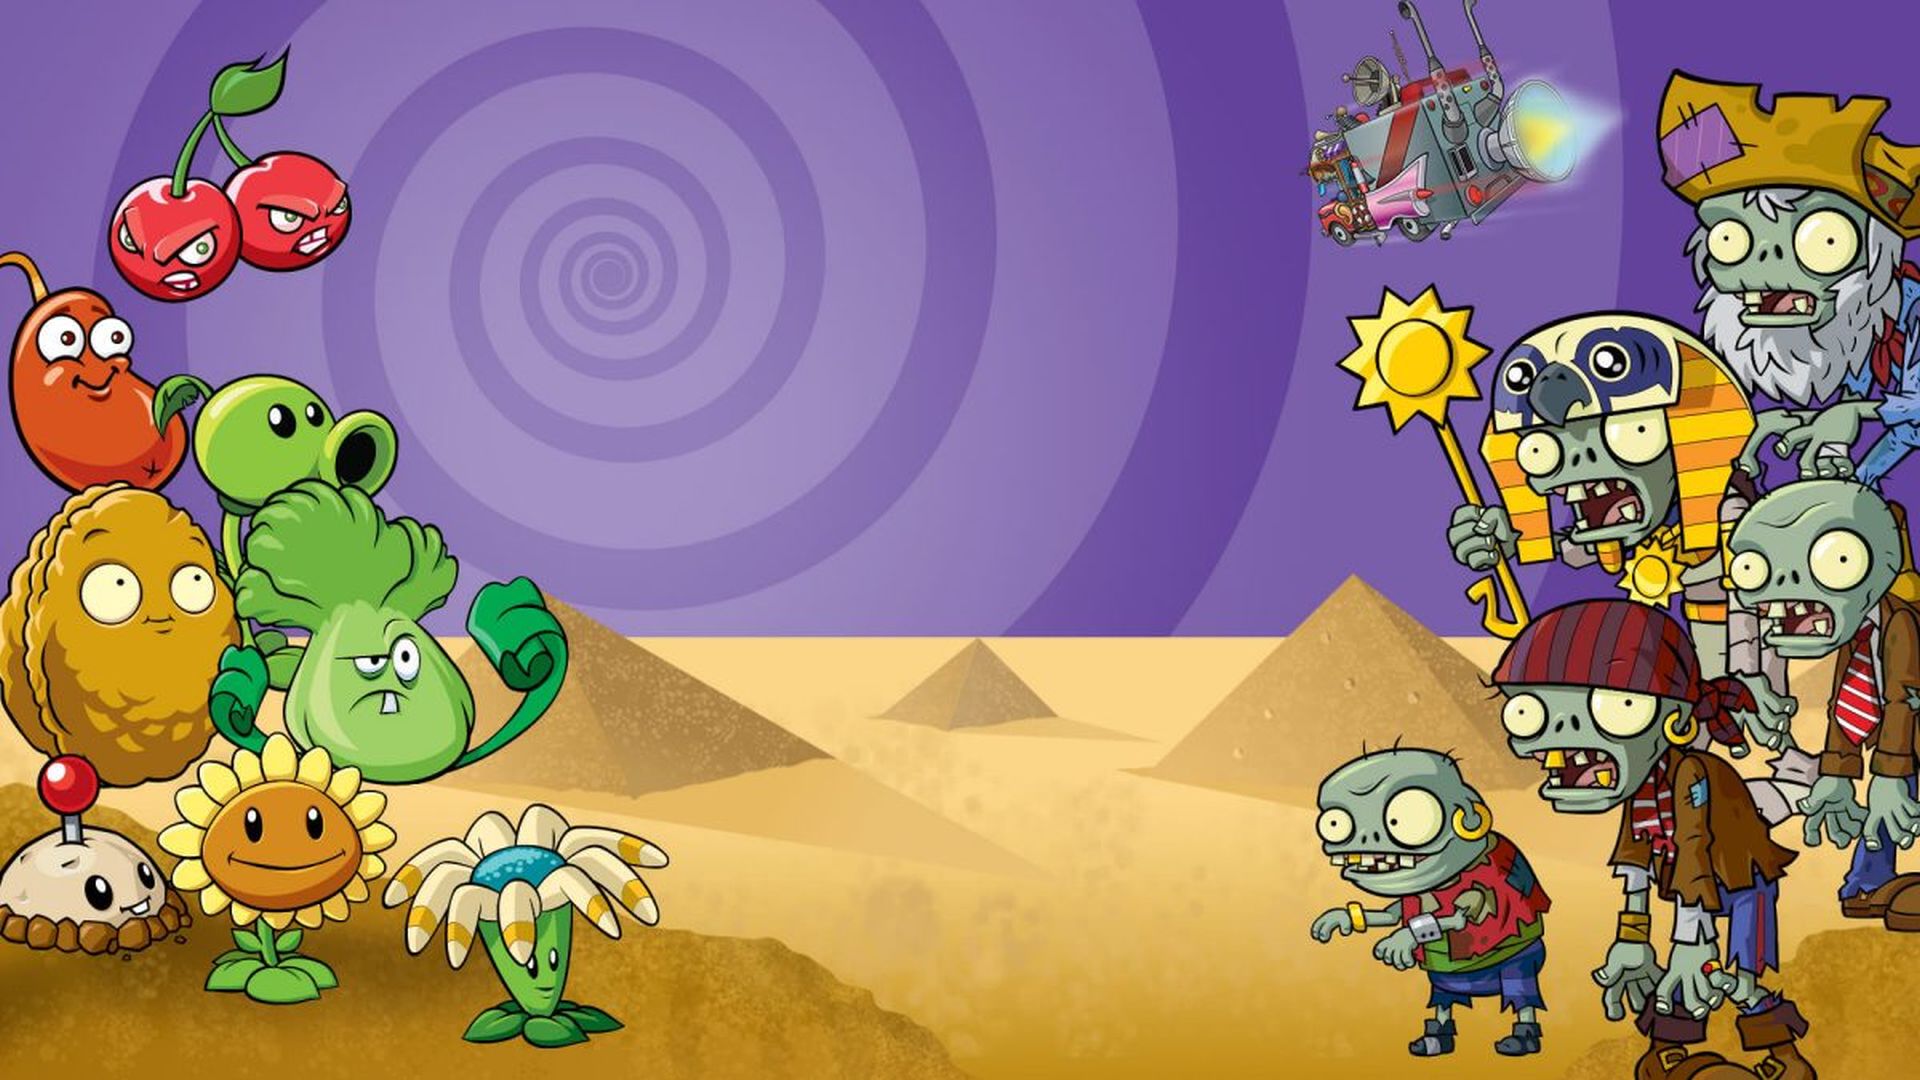 Plants vs. Zombies 3 Enters Limited Testing, Goes Back to Basics